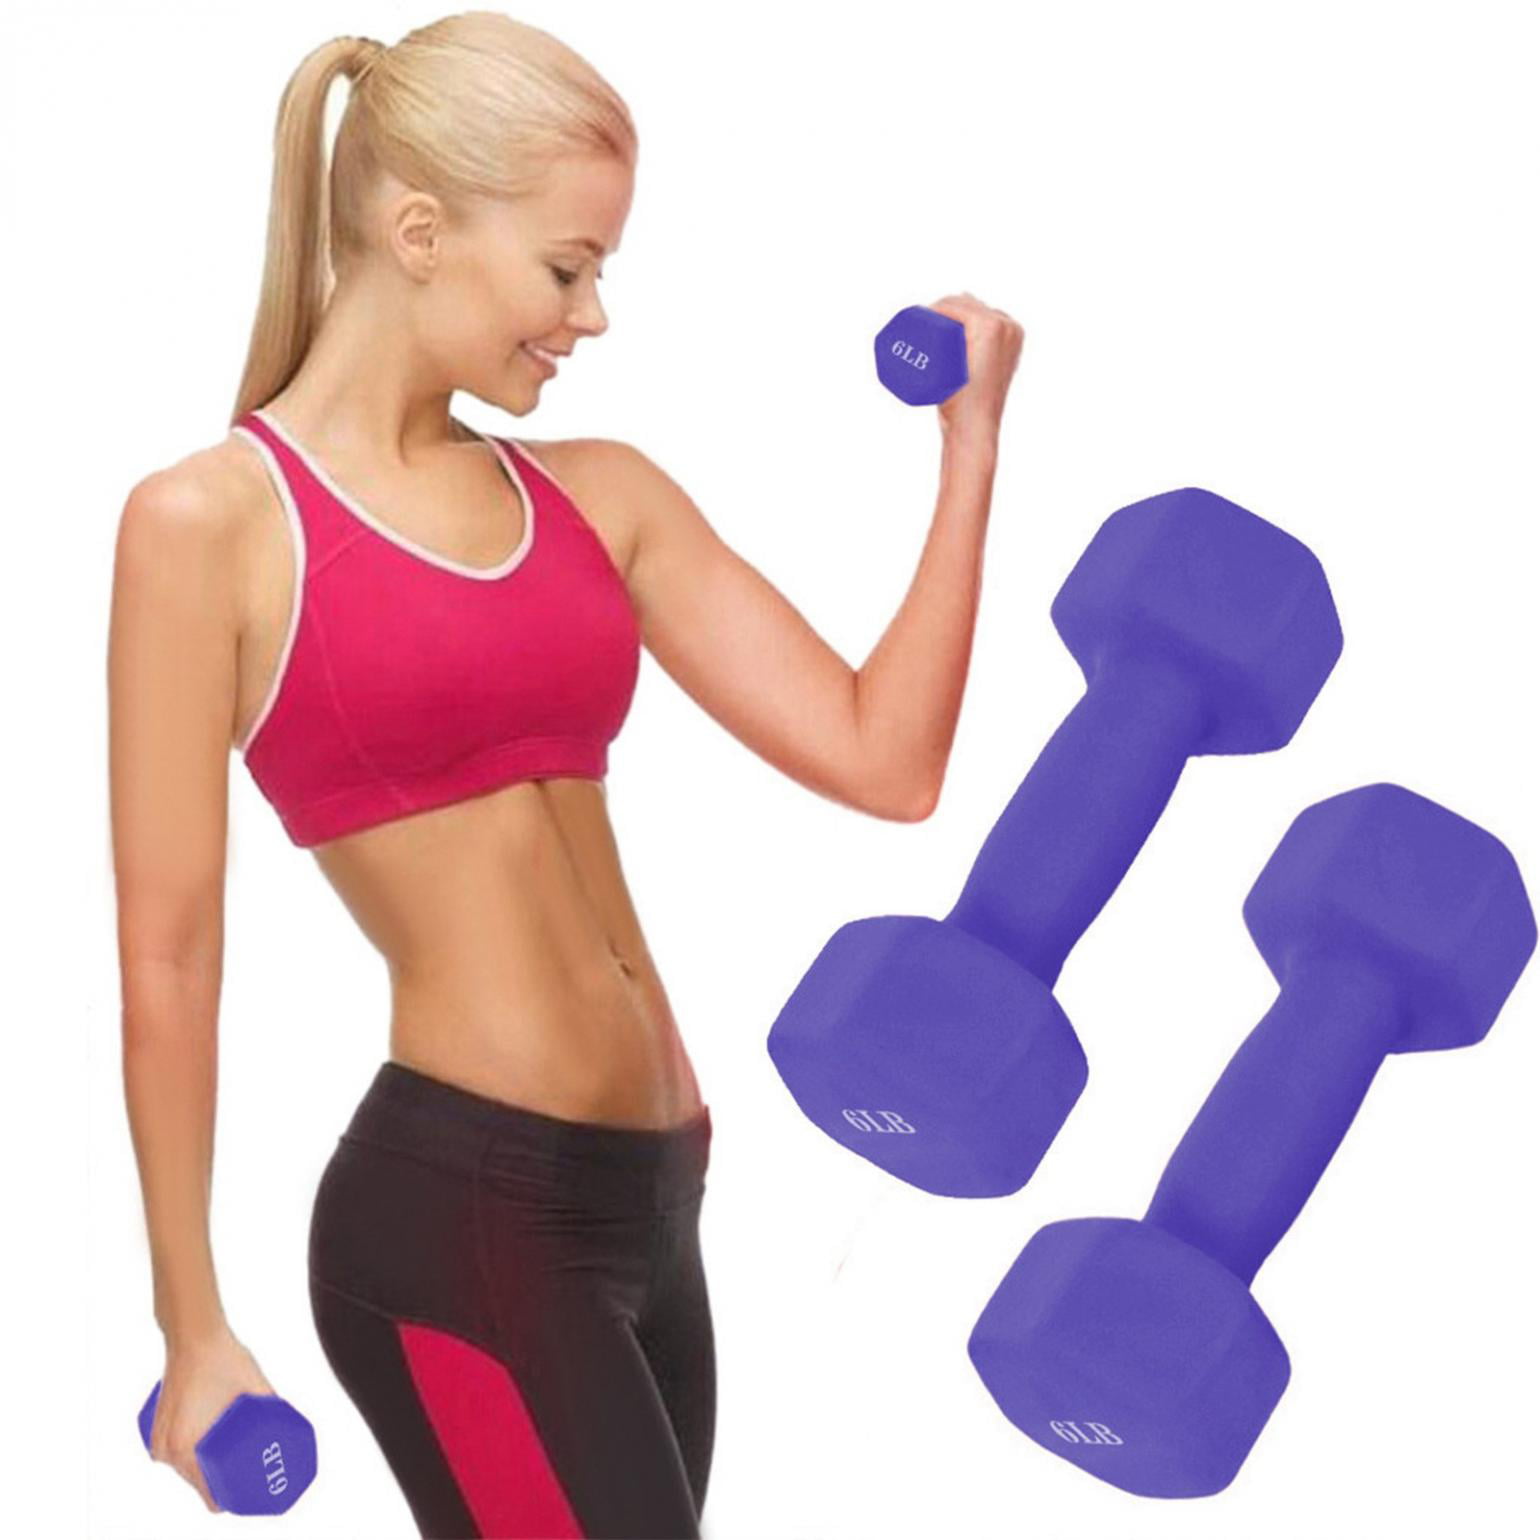 5-20LBS Lady Kettlebell Weight Exercise Home Gym Fitness Body Building Dumbbells 